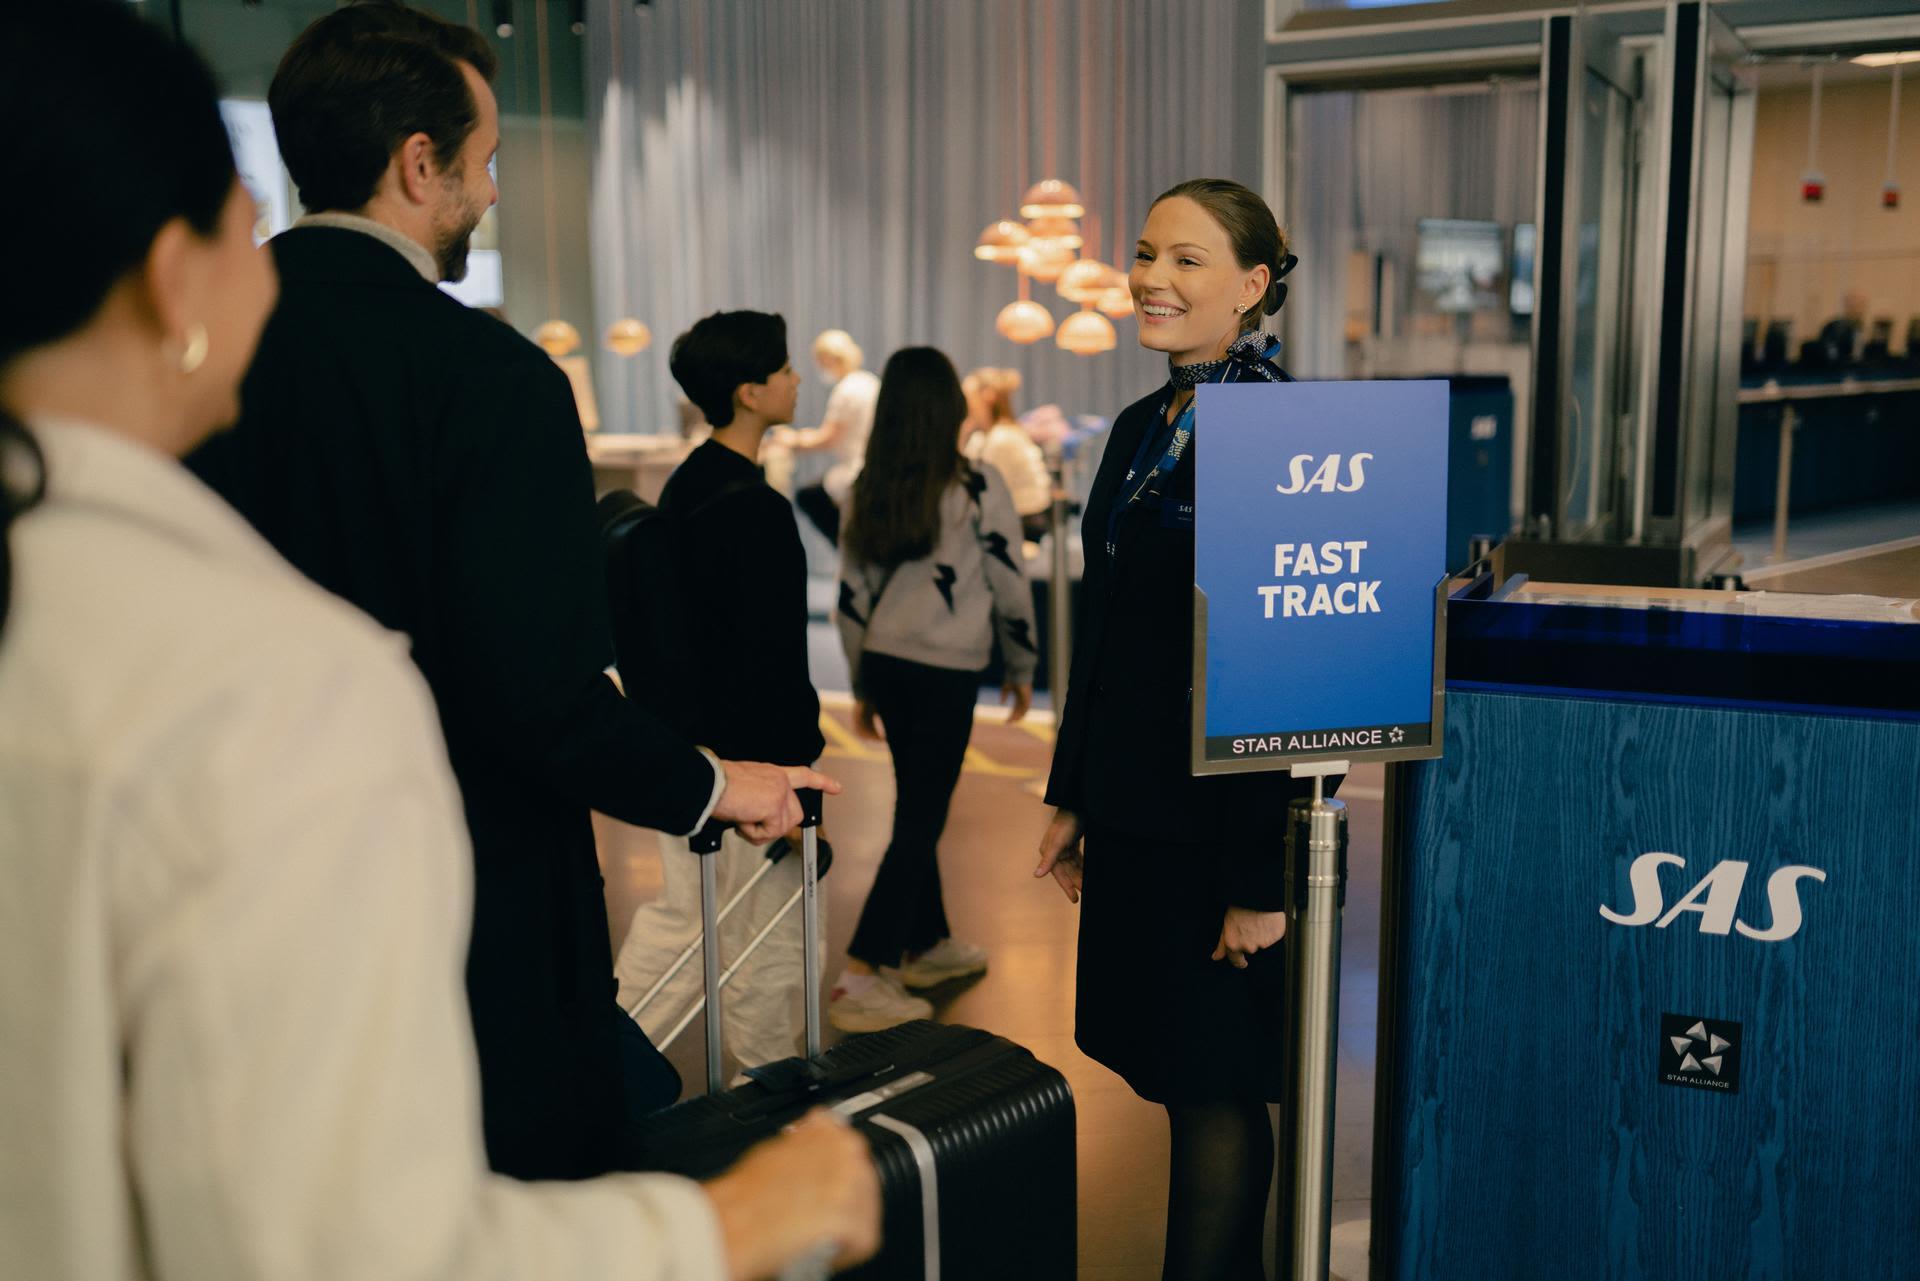 People pass through airport fast track